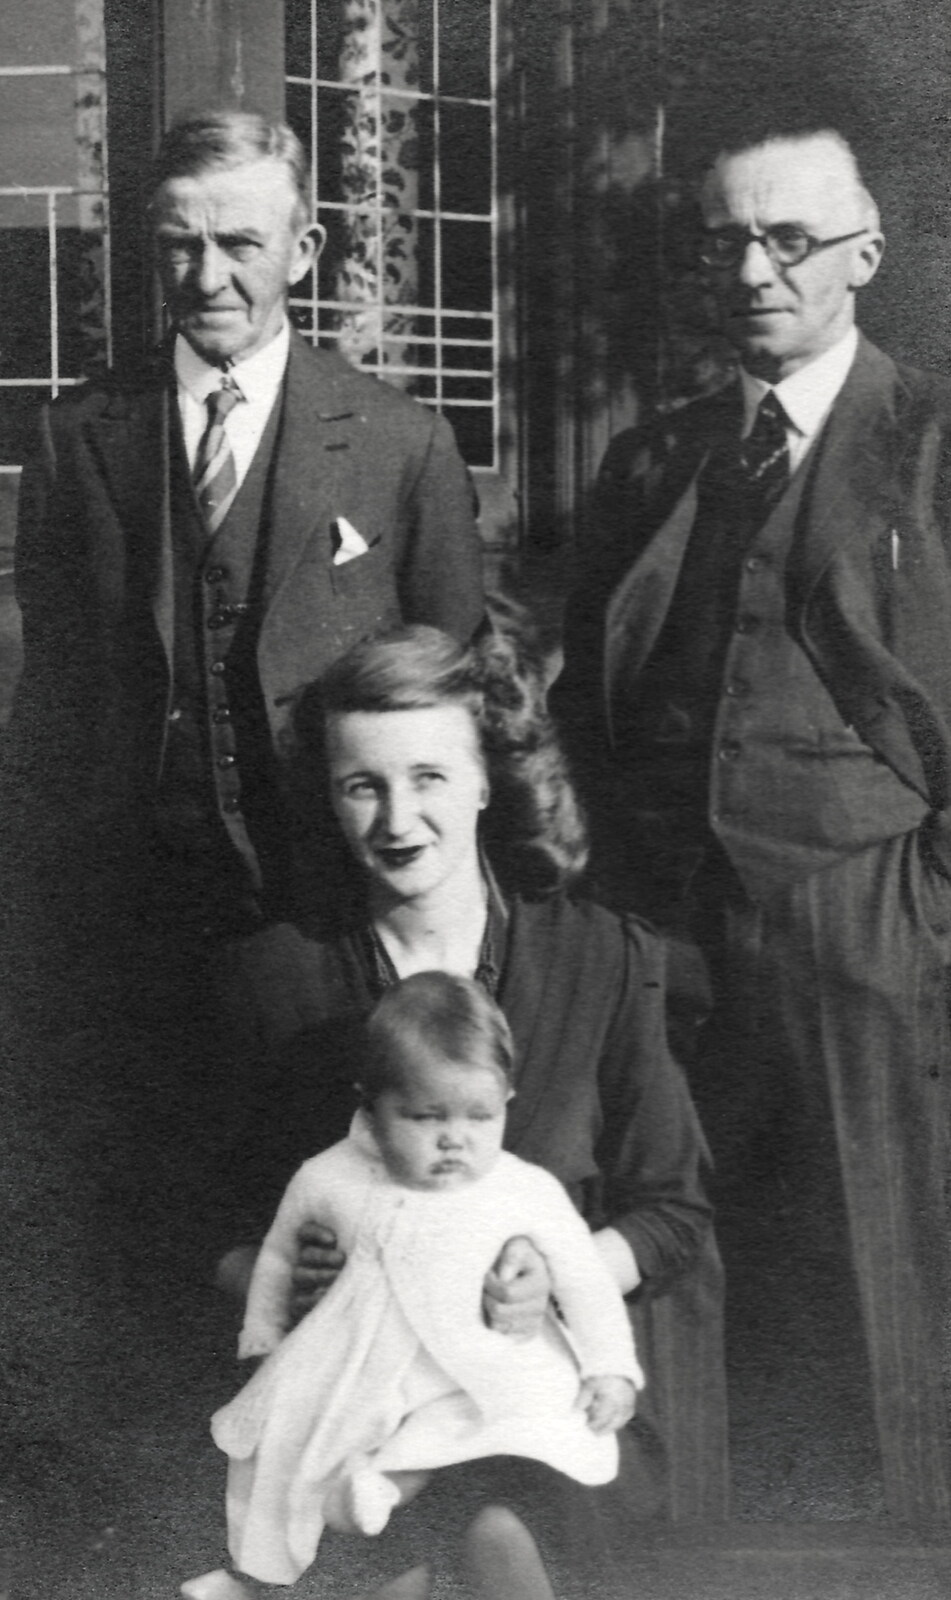 Family History: The 1940s and 1950s - 24th January 2020: Janet and her two grandfathers